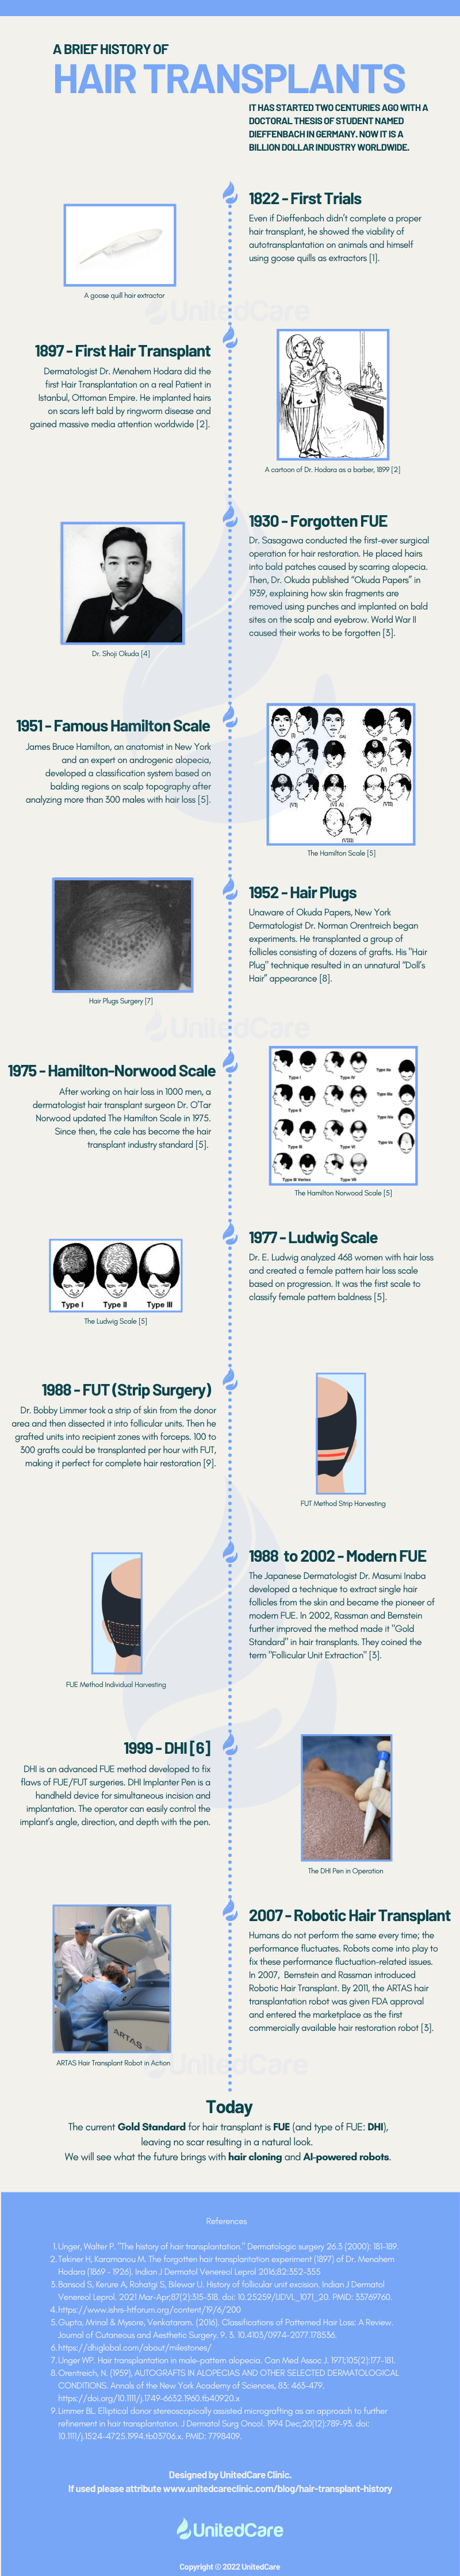 The timeline of 200 years old hair transplant surgeries